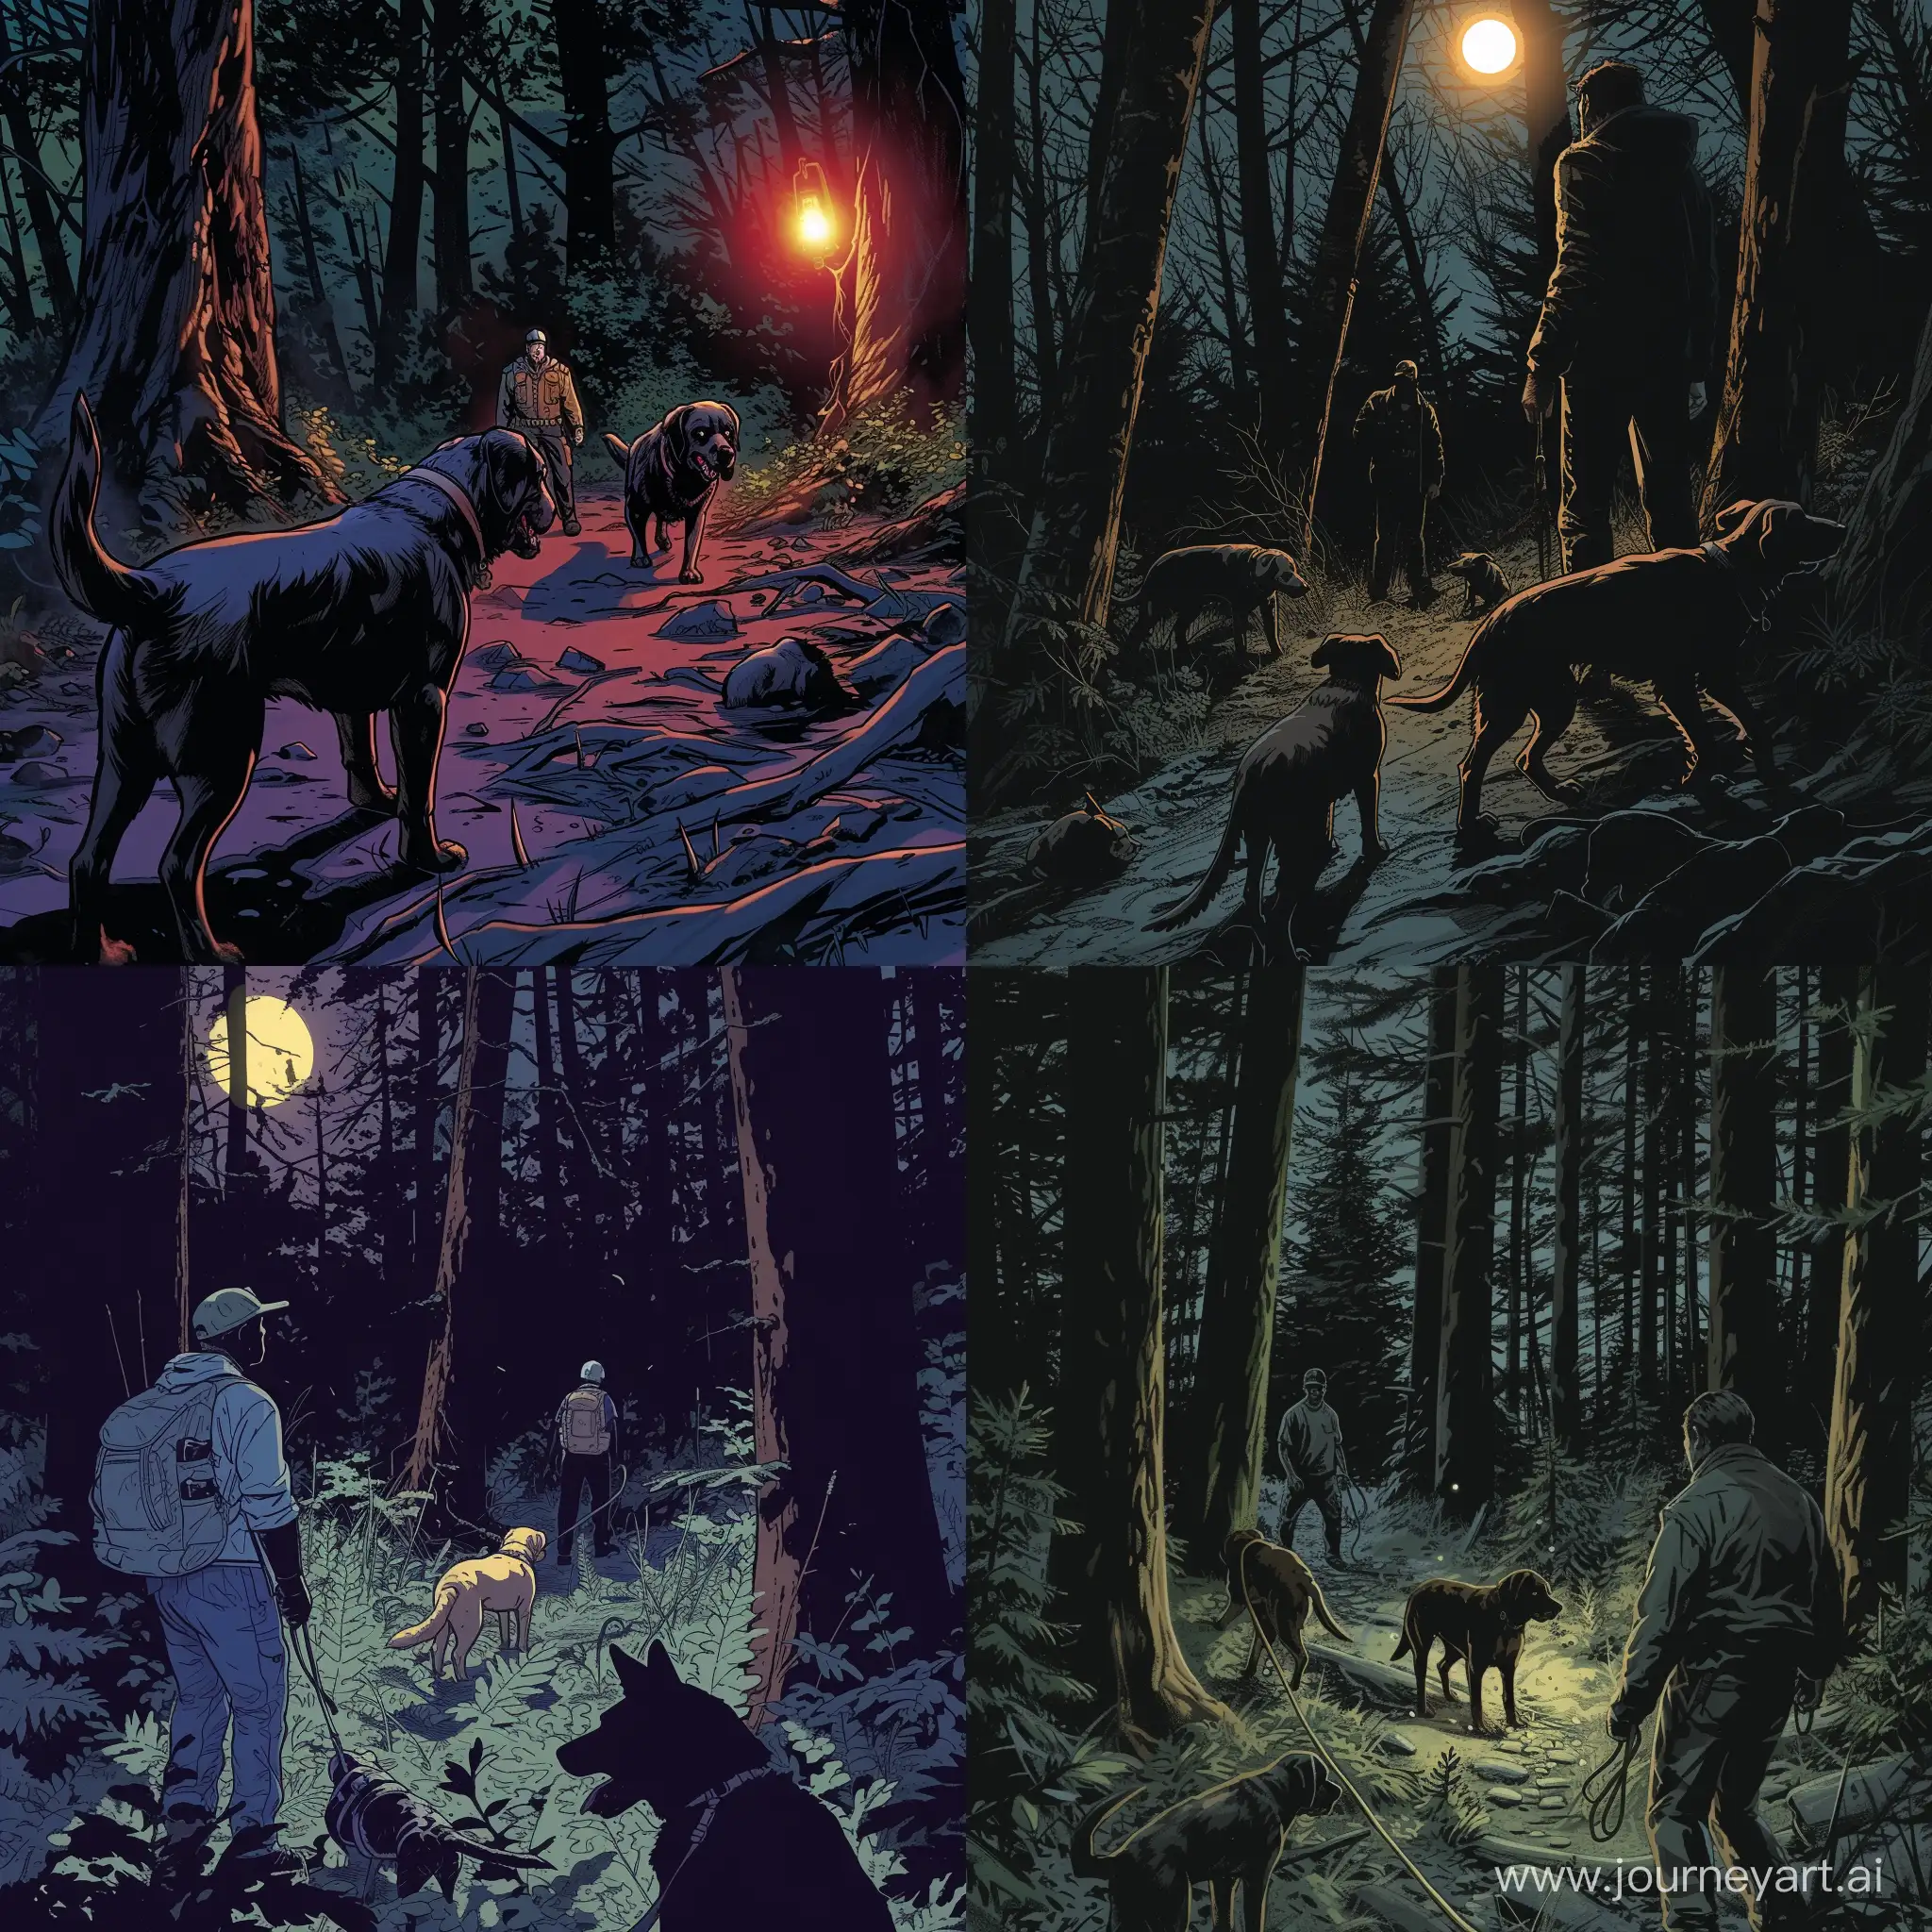 canines and rescuers are looking for someone in the woods, little lighting, modern american comic book style.